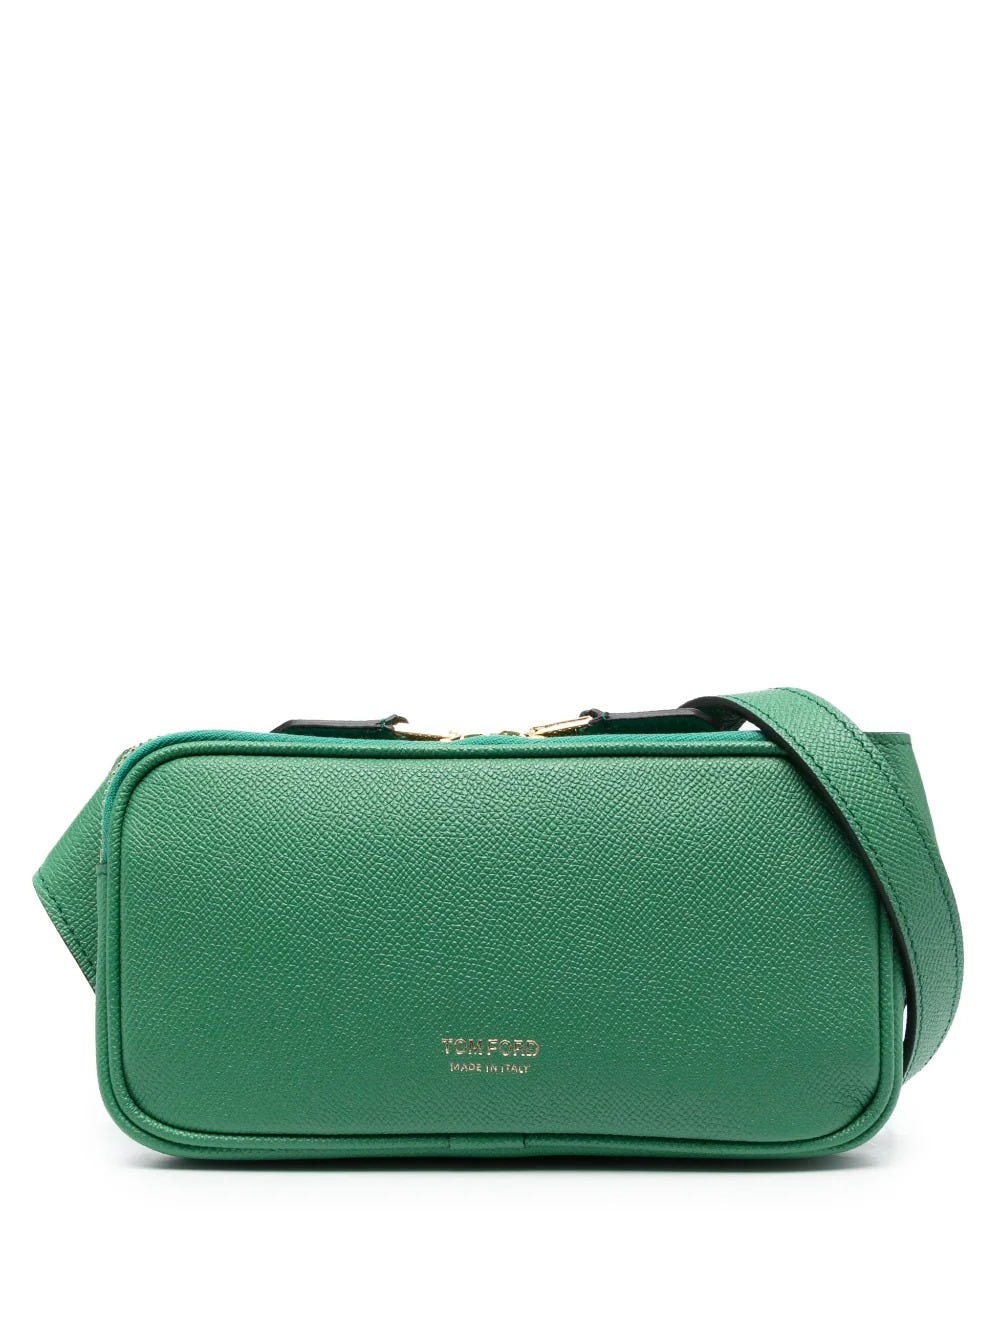 TOM FORD GREEN EMBOSSED FANNY PACK WITH LOGO